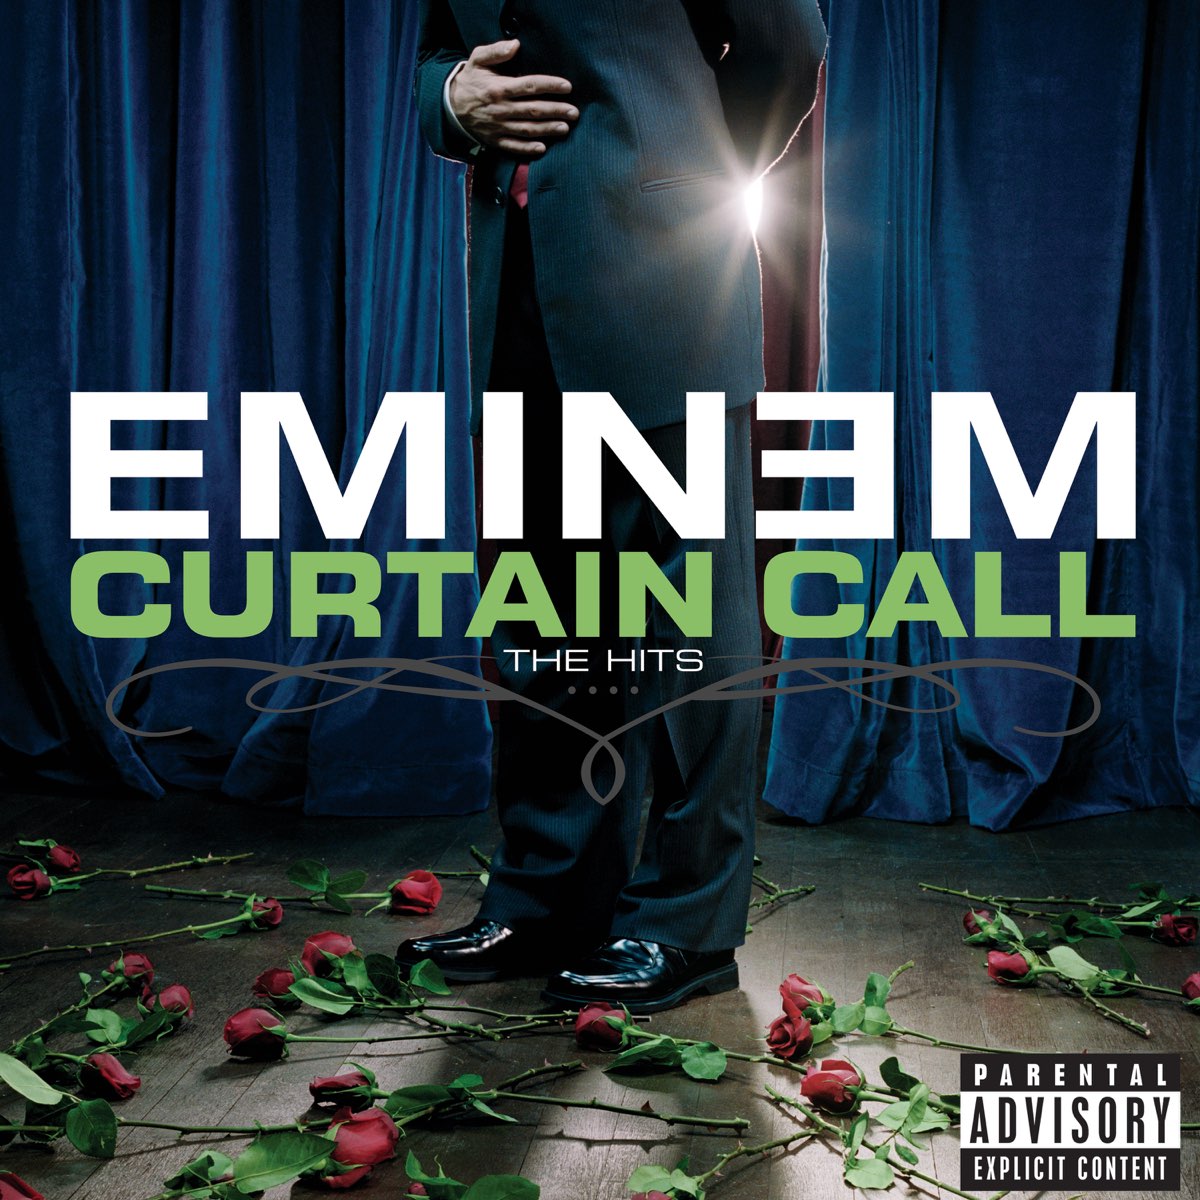 Curtain Call: The Hits by Eminem on Apple Music